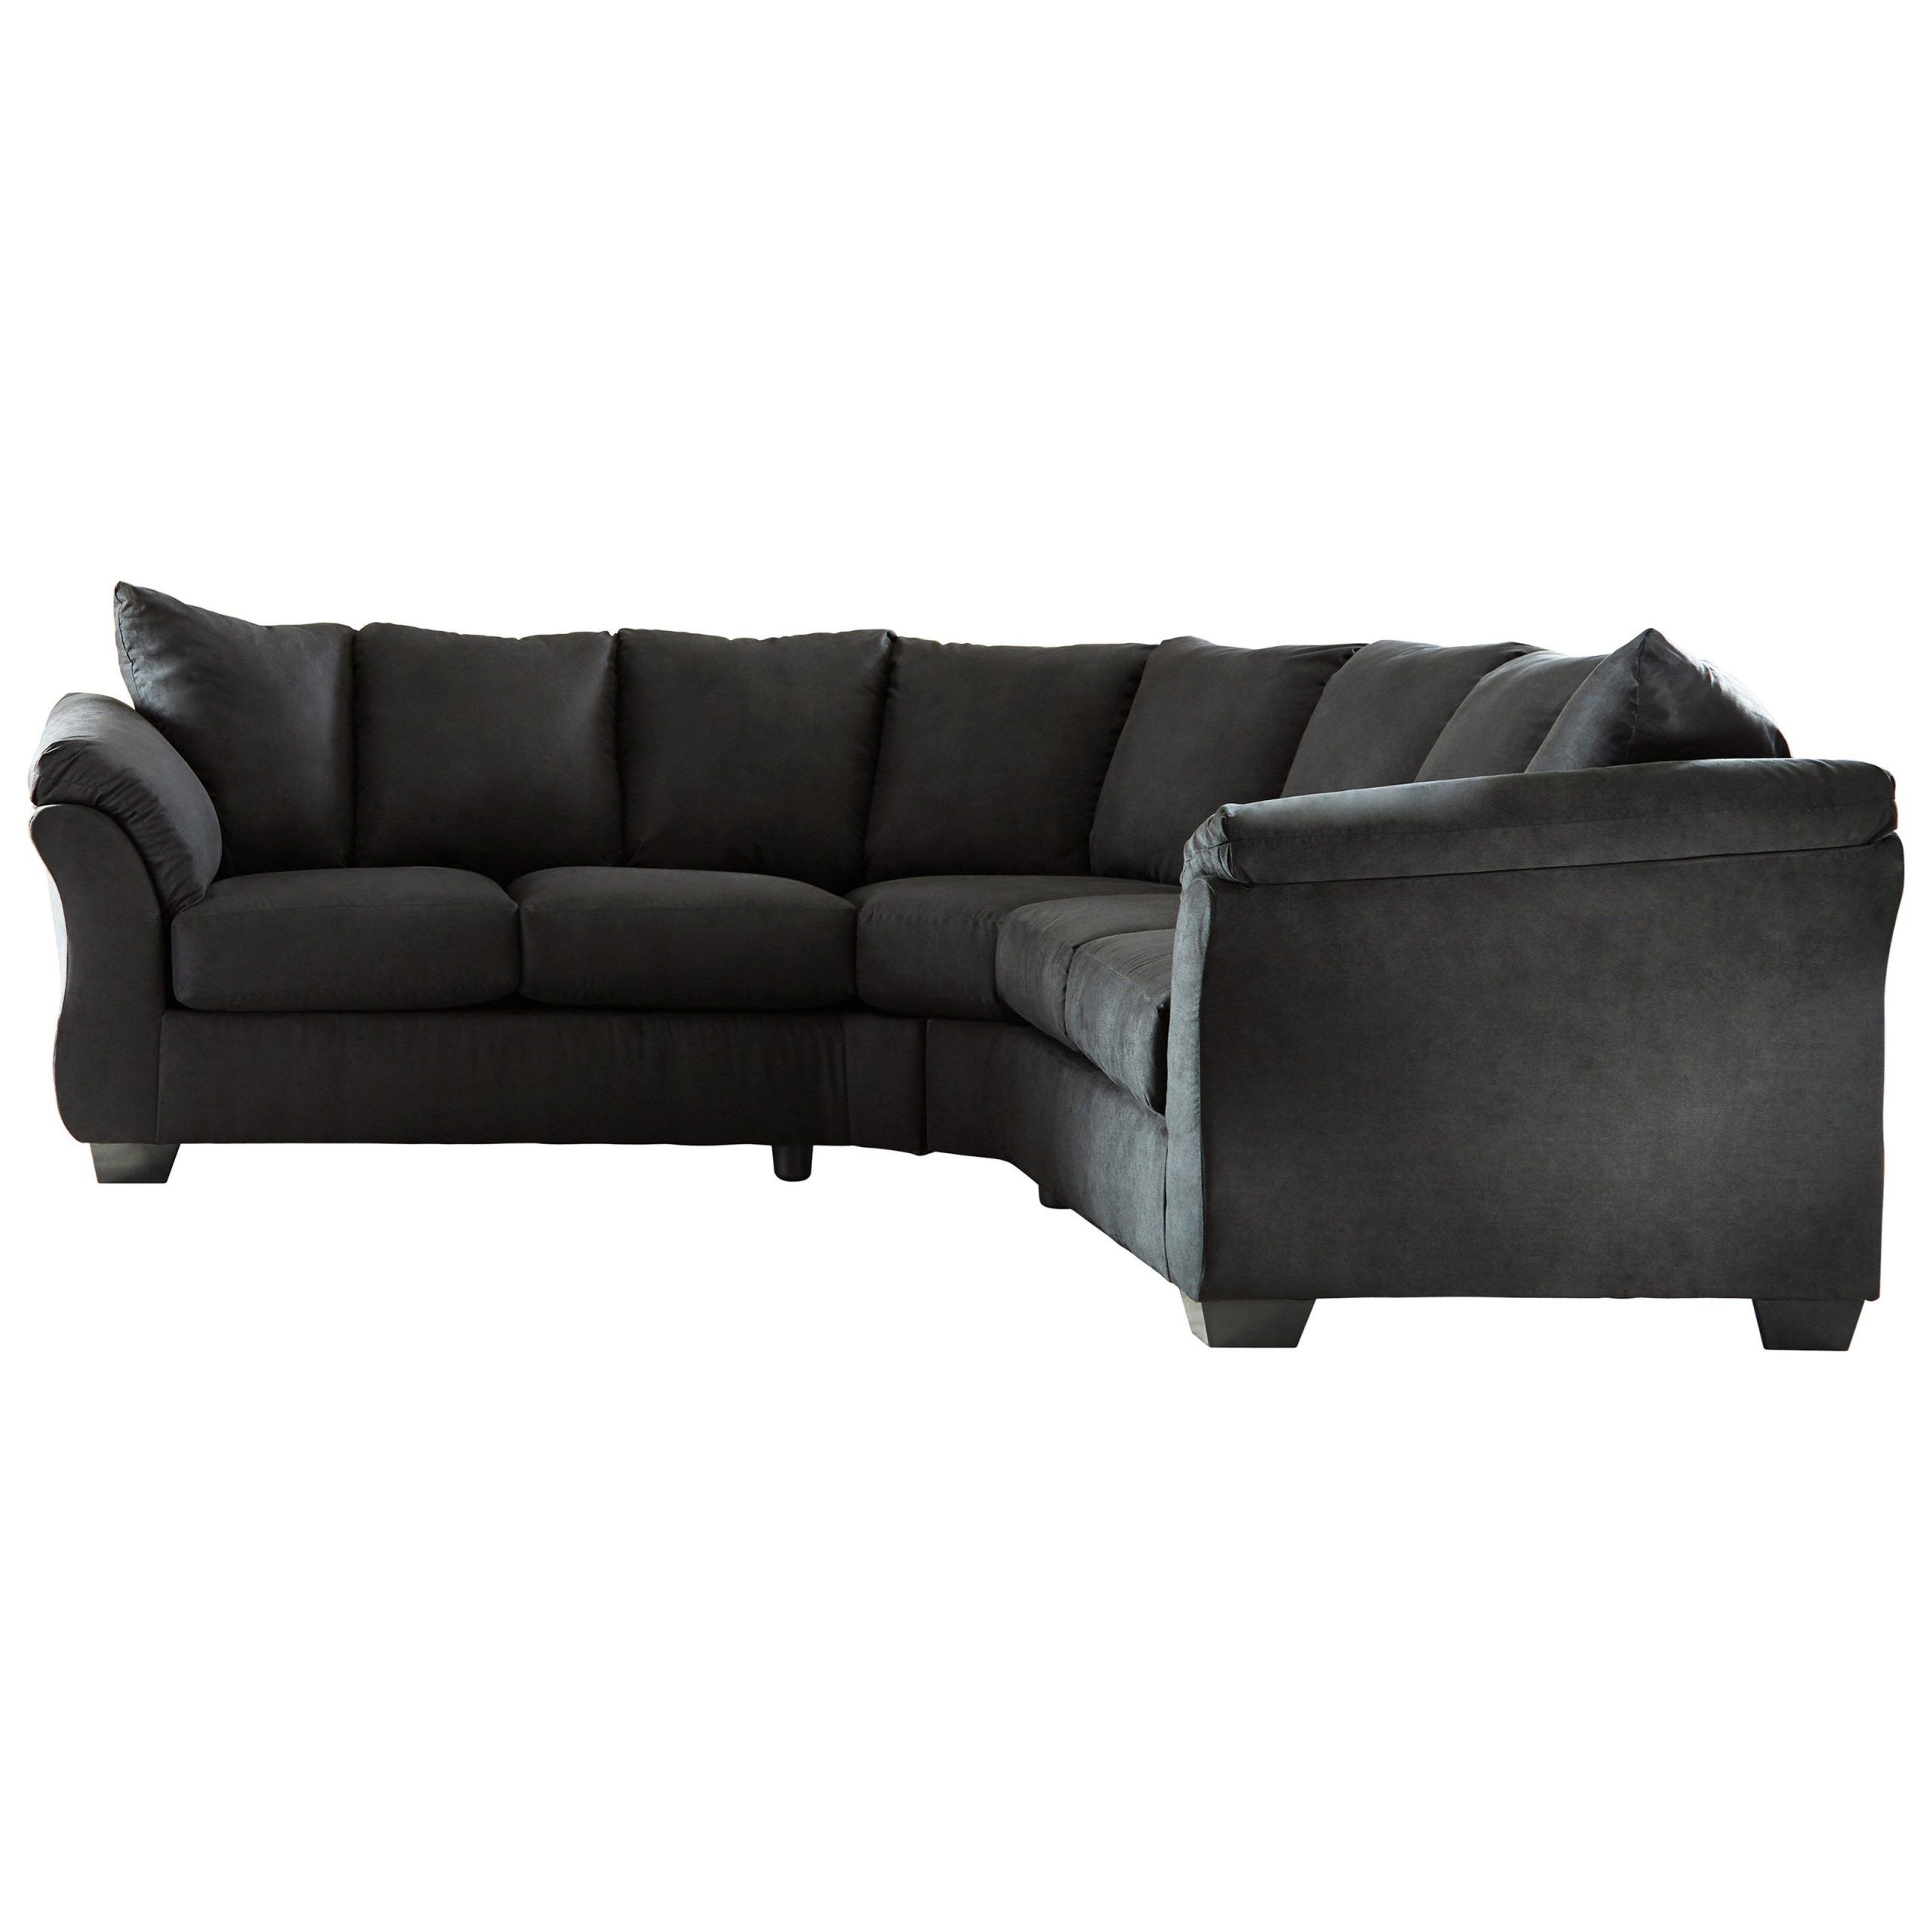 Contemporary Sectional Sofa With Sweeping Pillow Arms 104" X 104" Black Intended For 104" Sectional Sofas (View 2 of 20)